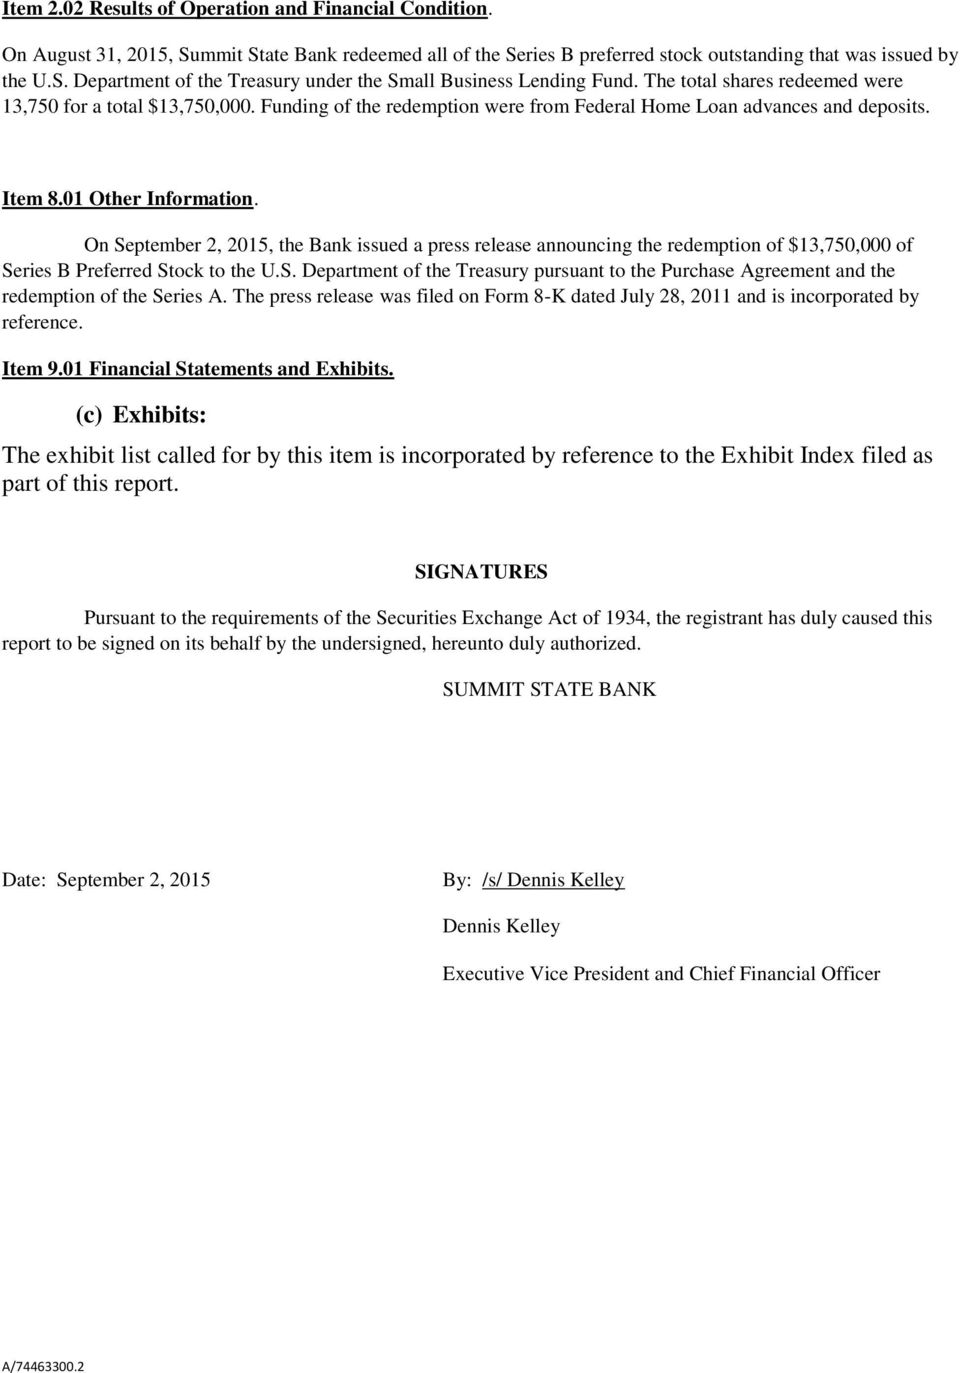 On September 2, 2015, the Bank issued a press release announcing the redemption of $13,750,000 of Series B Preferred Stock to the U.S. Department of the Treasury pursuant to the Purchase Agreement and the redemption of the Series A.